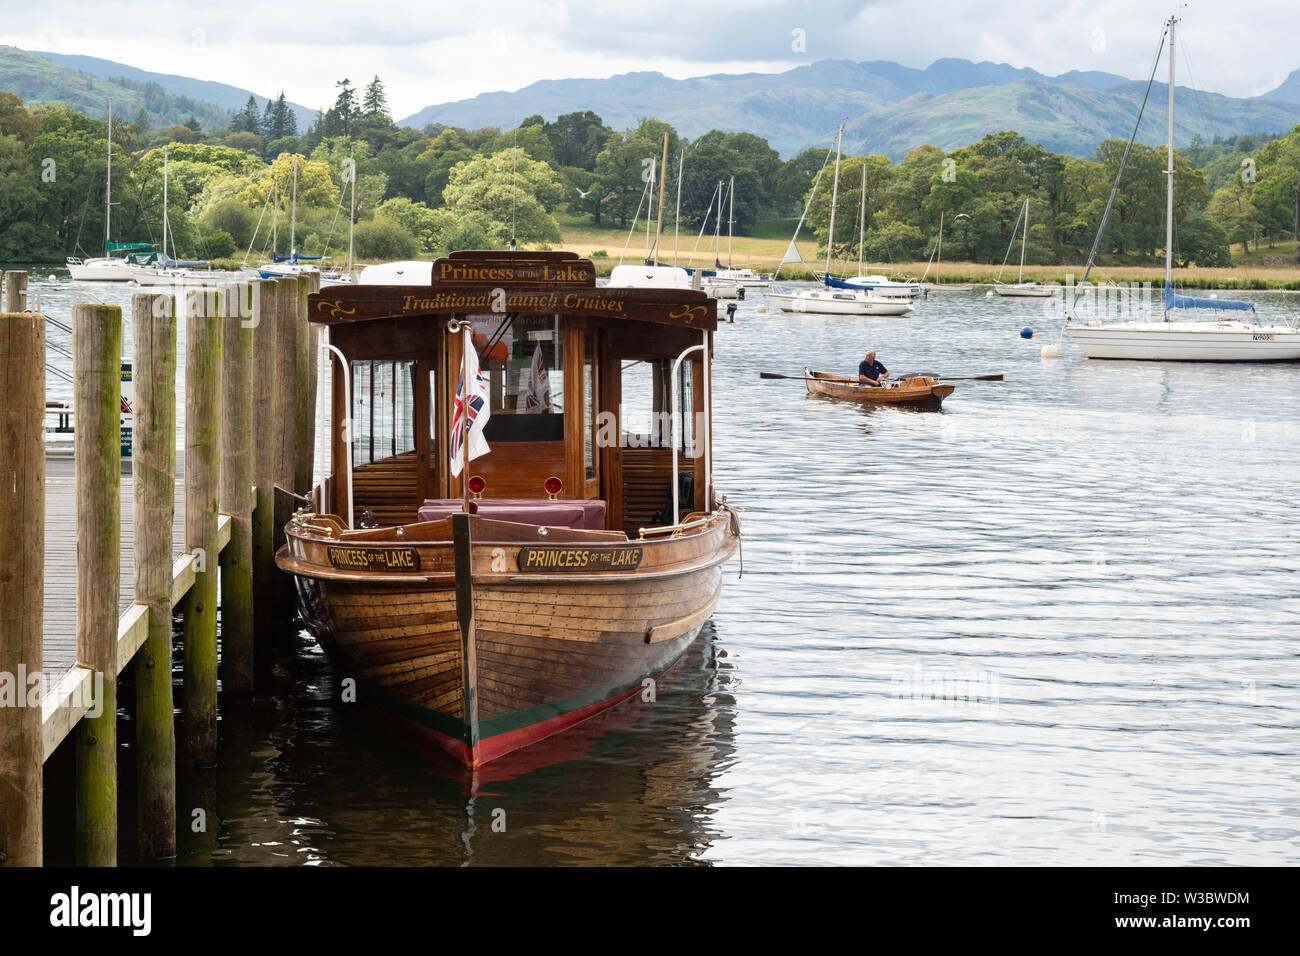 Ambleside, Cumbria, UK. 14th July 2019. UK weather - a cloudy day for visitors enjoying the boats on Lake Windermere arriving in Ambleside, Cumbria in the Lake District.  Tomorrow is forecast to be a brighter day Credit: Kay Roxby/Alamy Live News Stock Photo